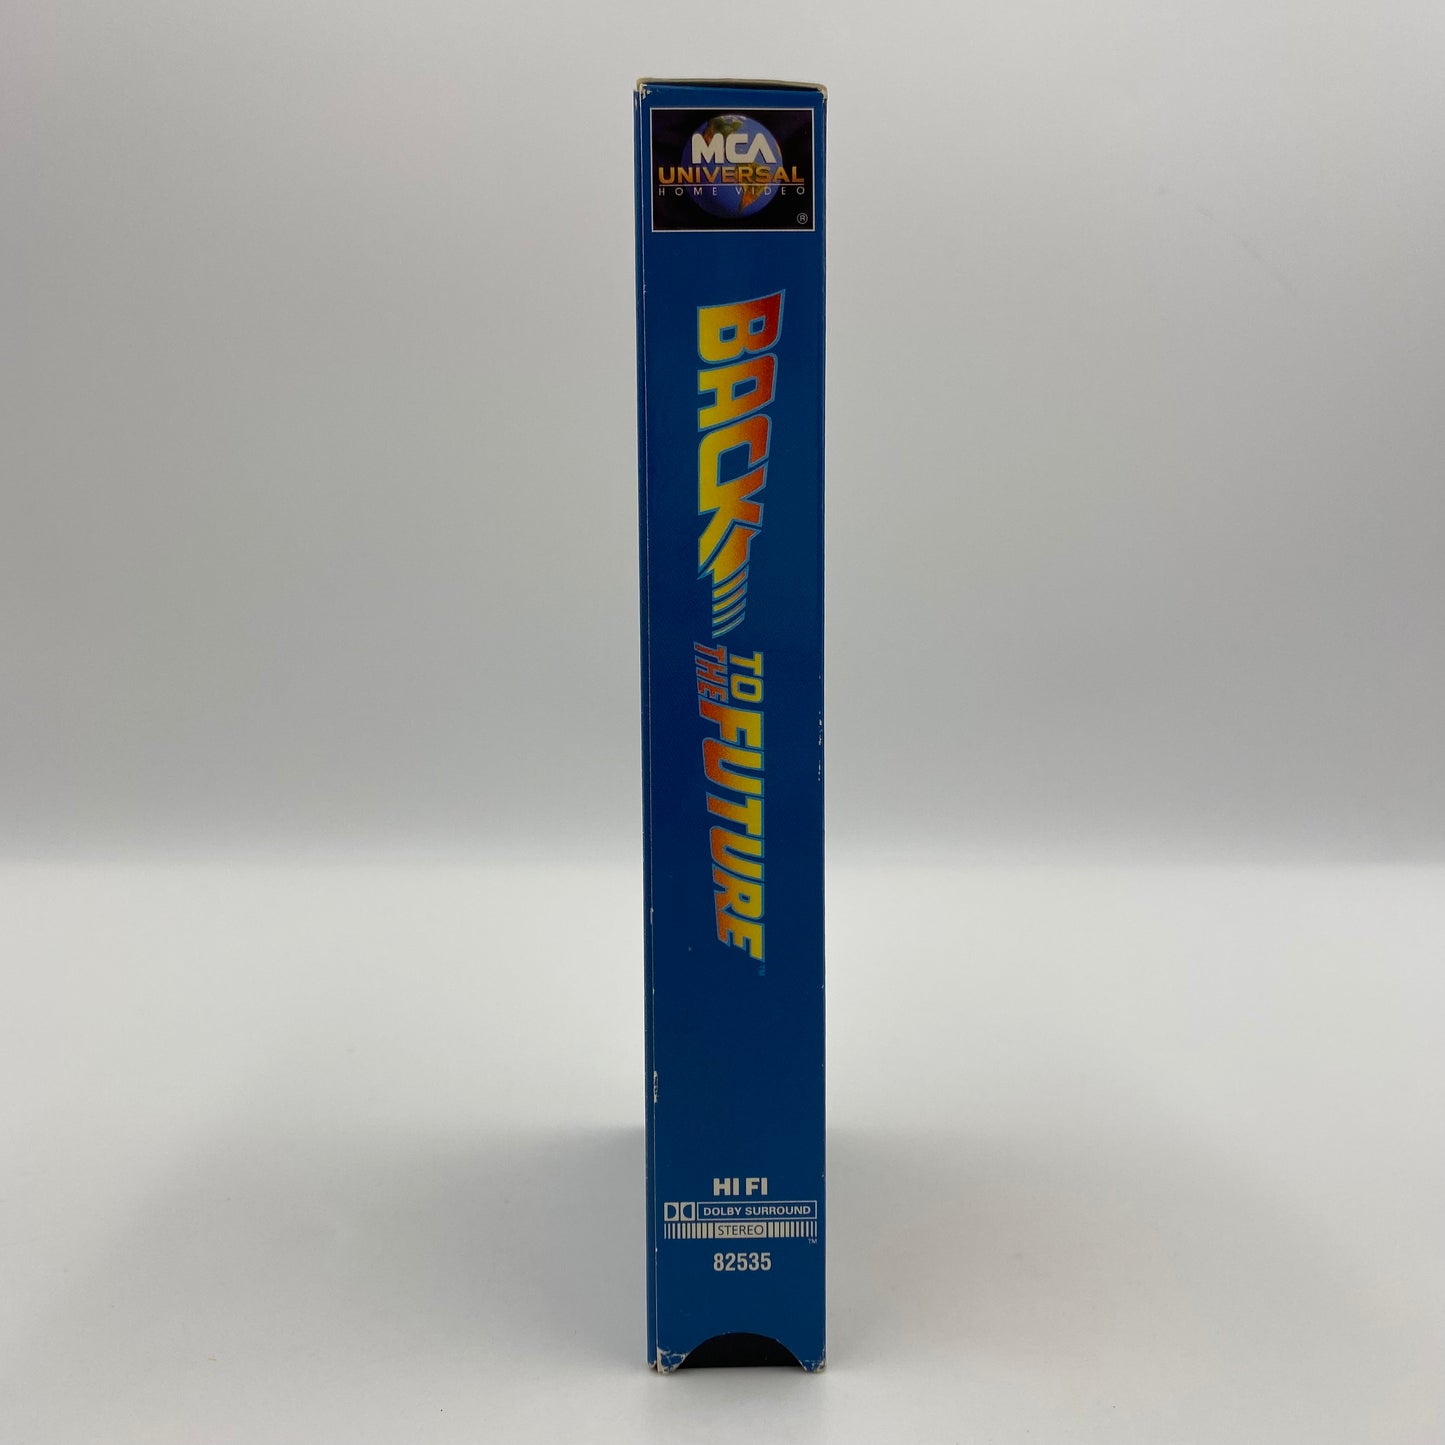 Back to the Future VHS tape (1995) MCA Universal Home Video